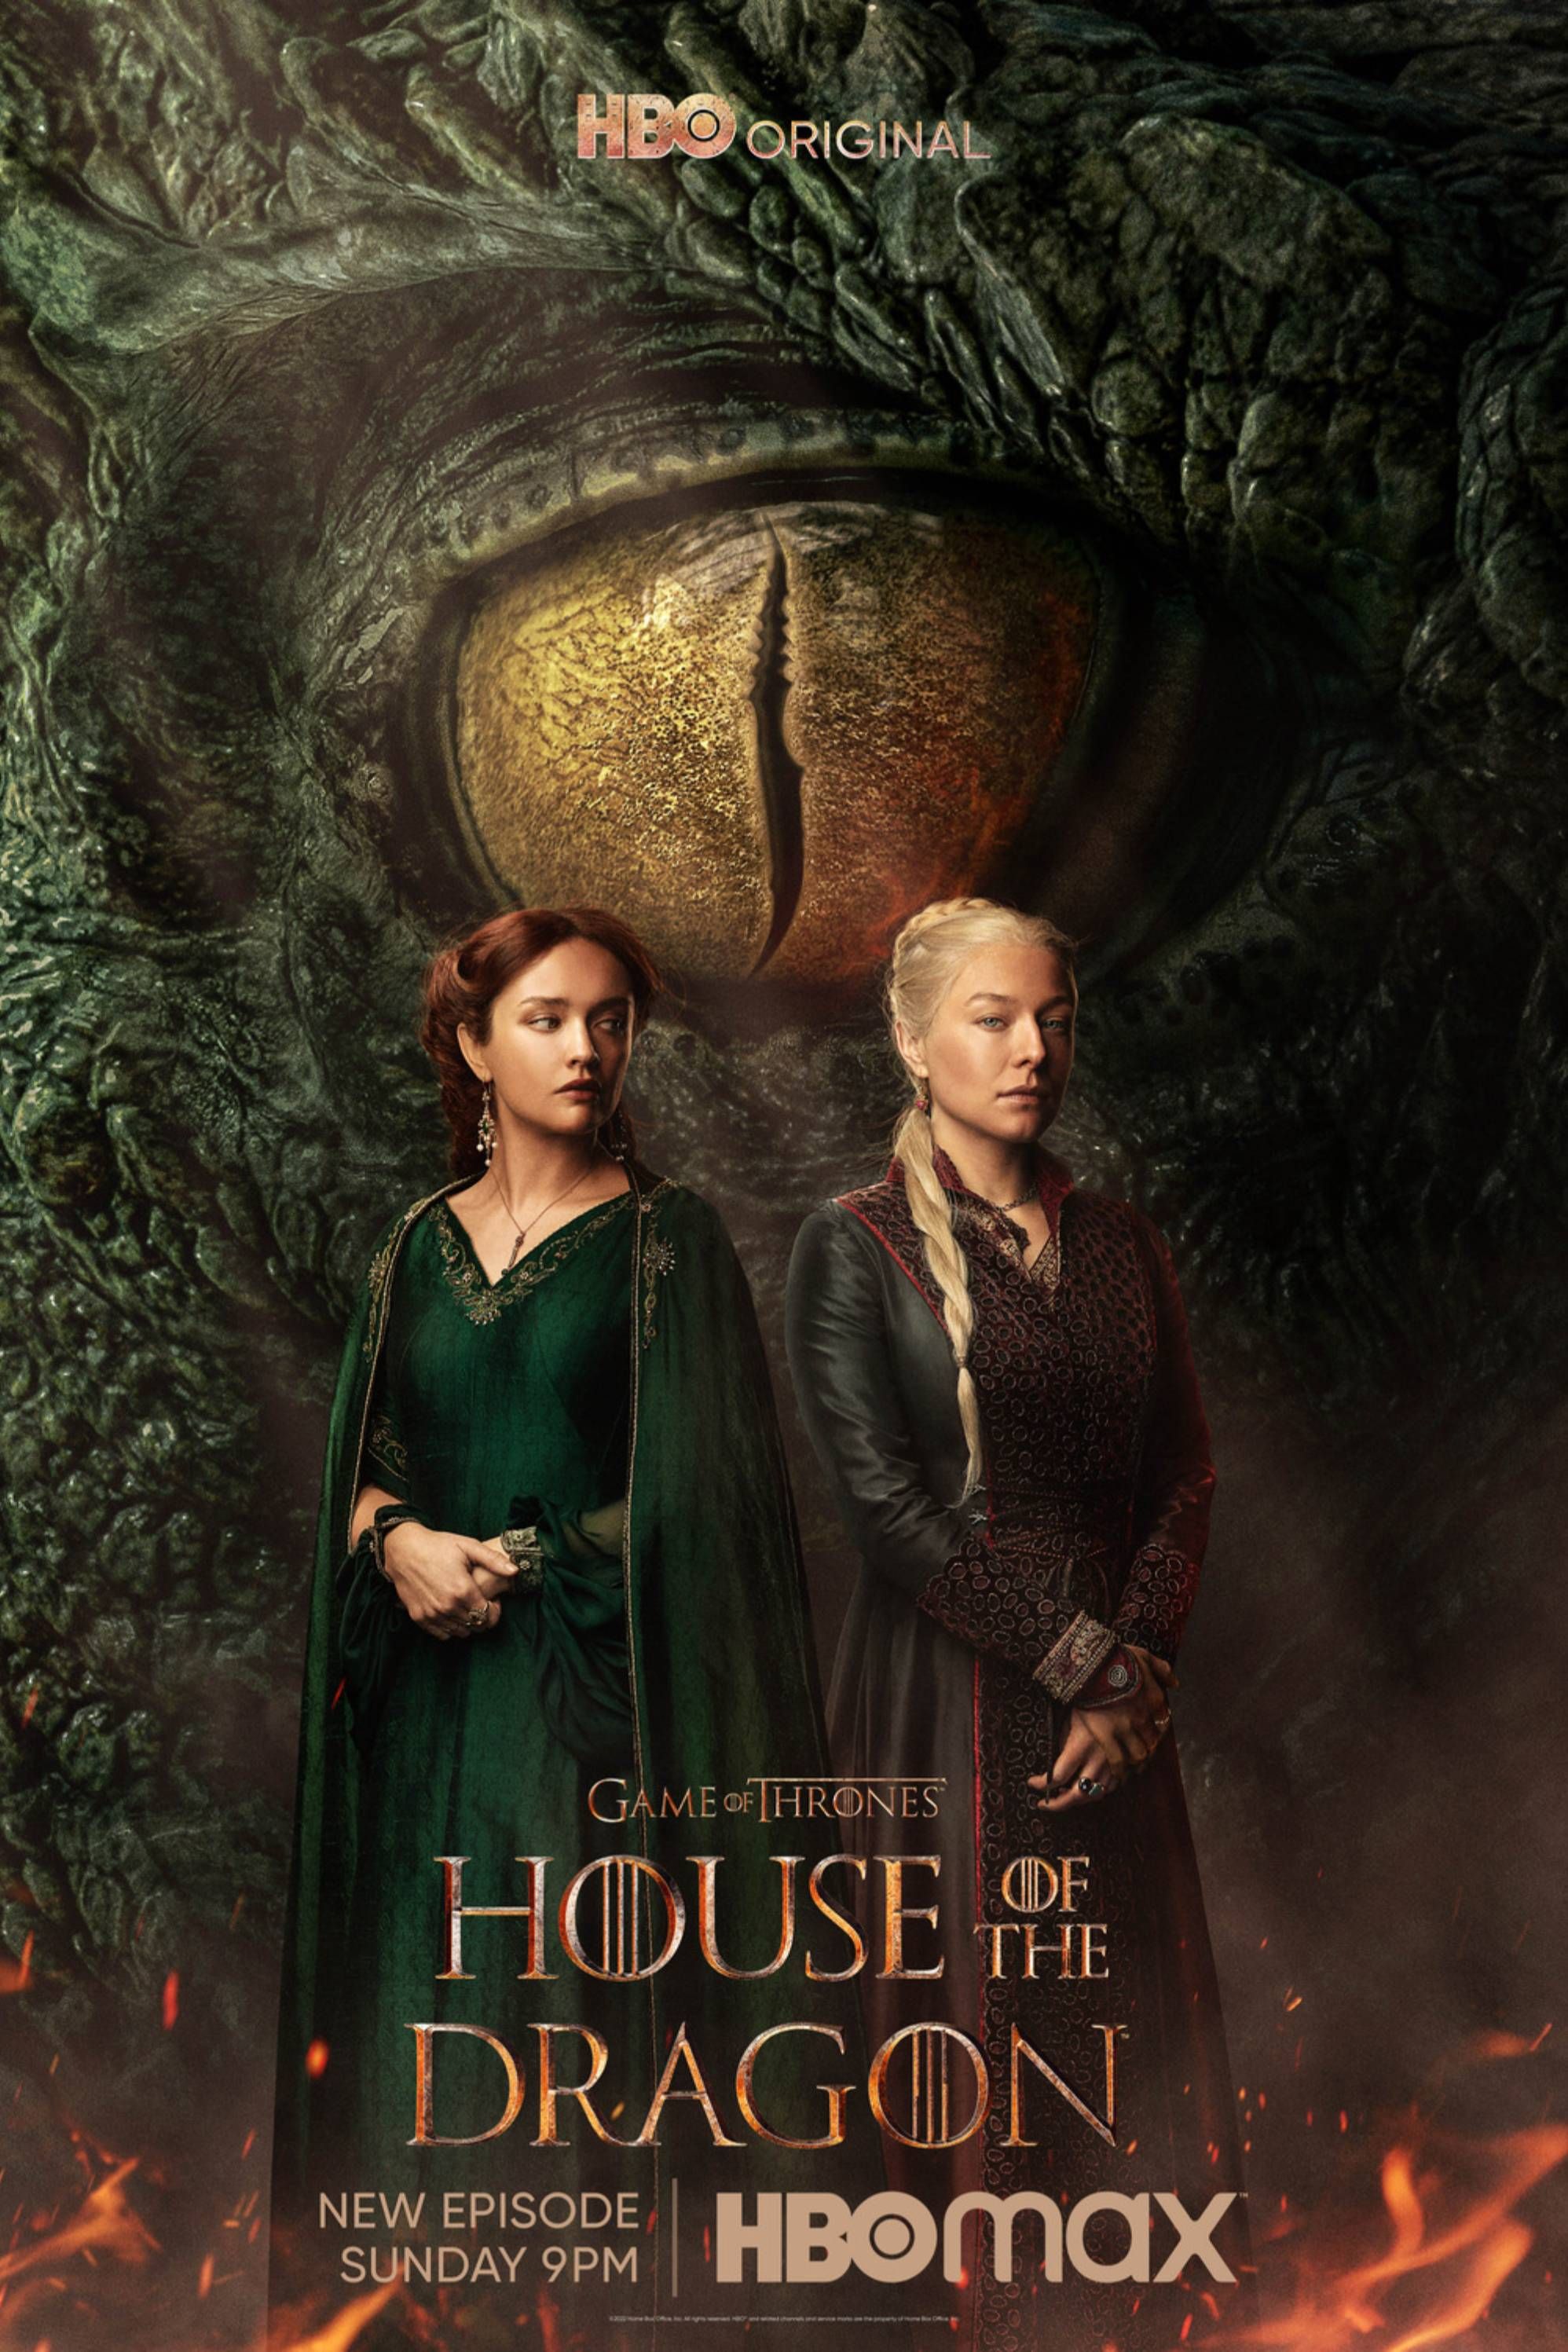 New Dragons And Their Dragonriders In House Of The Dragon Season 2